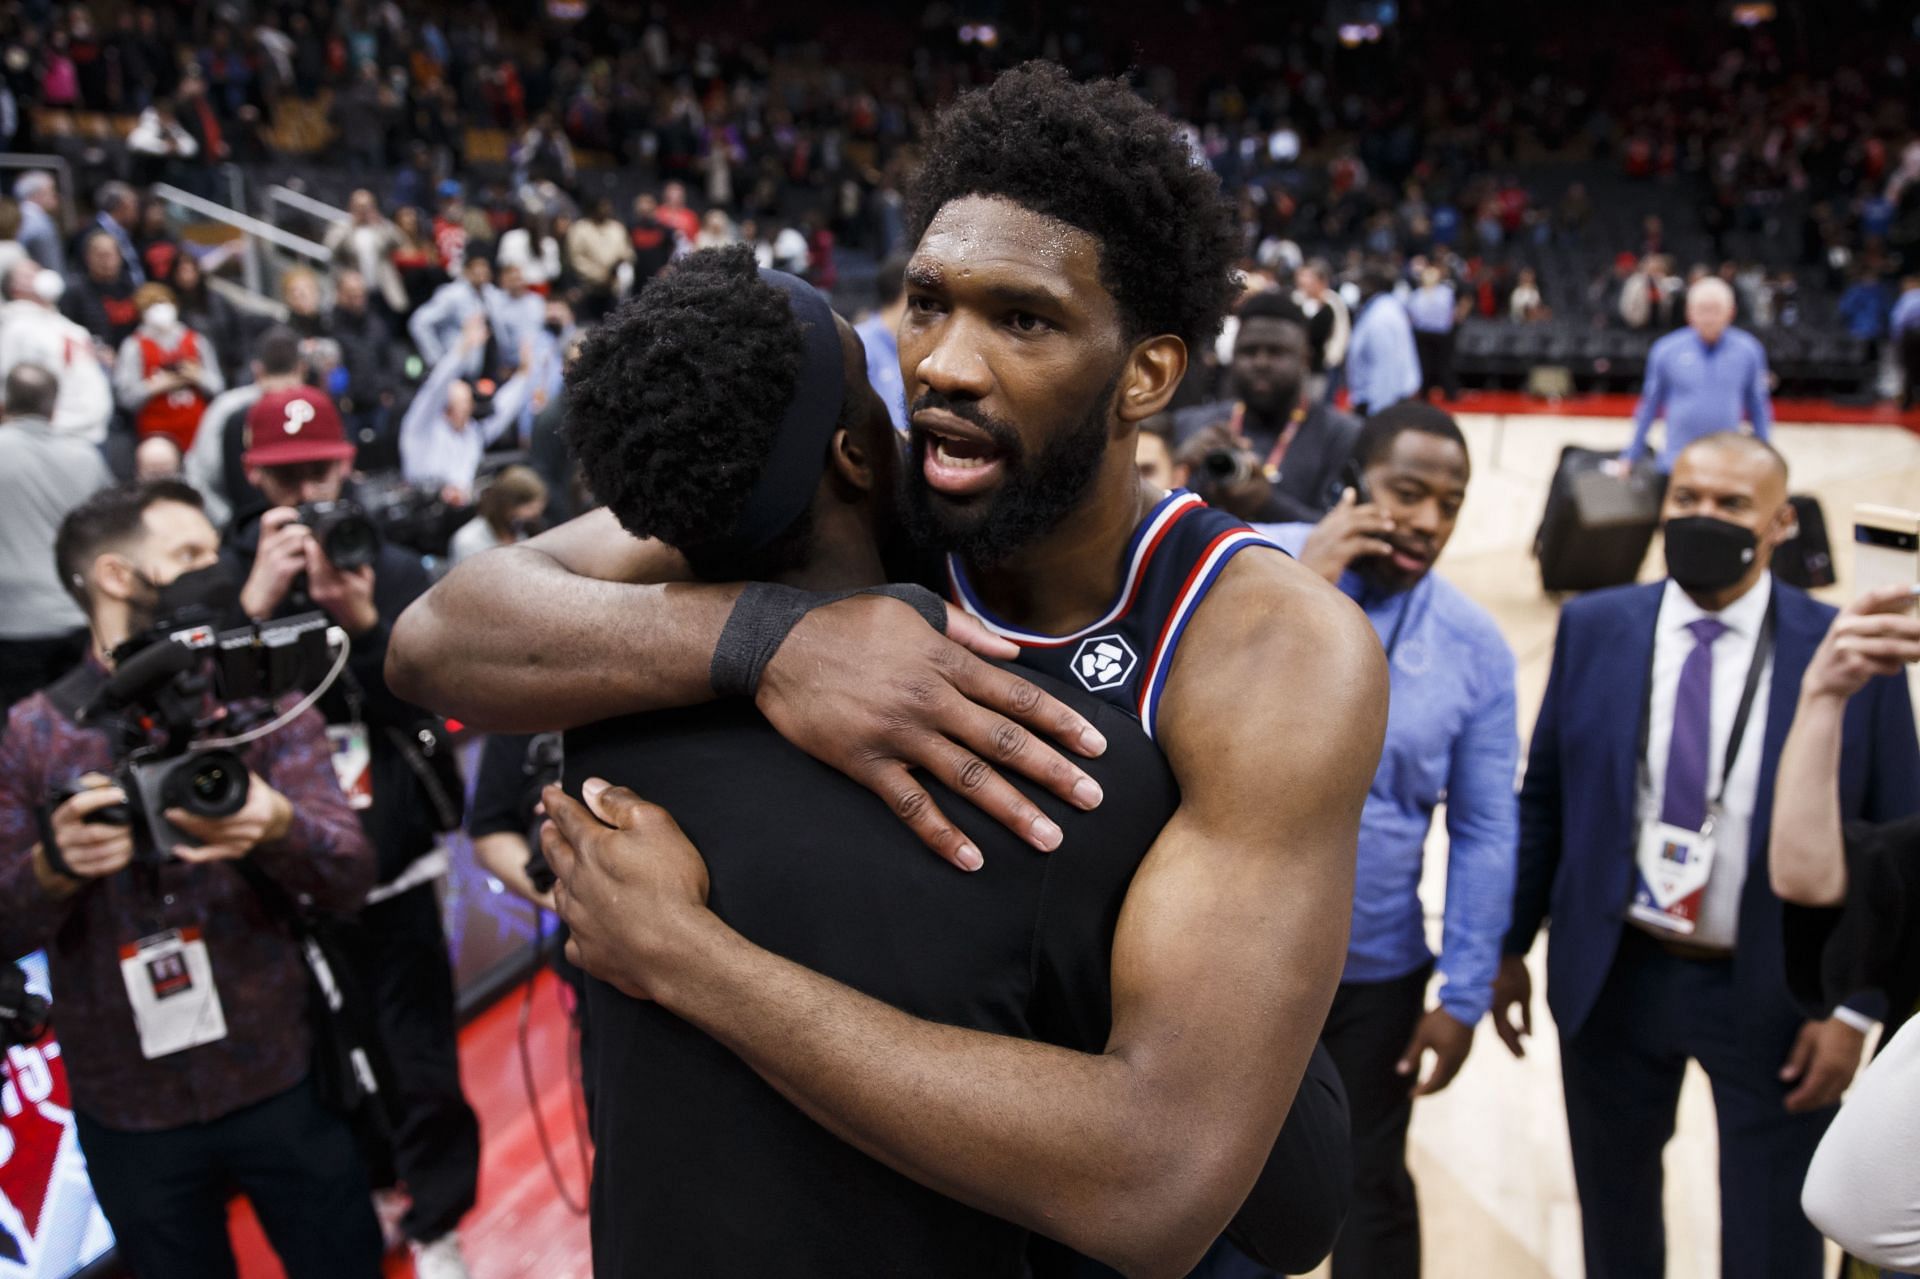 The NBA playoffs have been quite unlucky for Joel Embiid so far